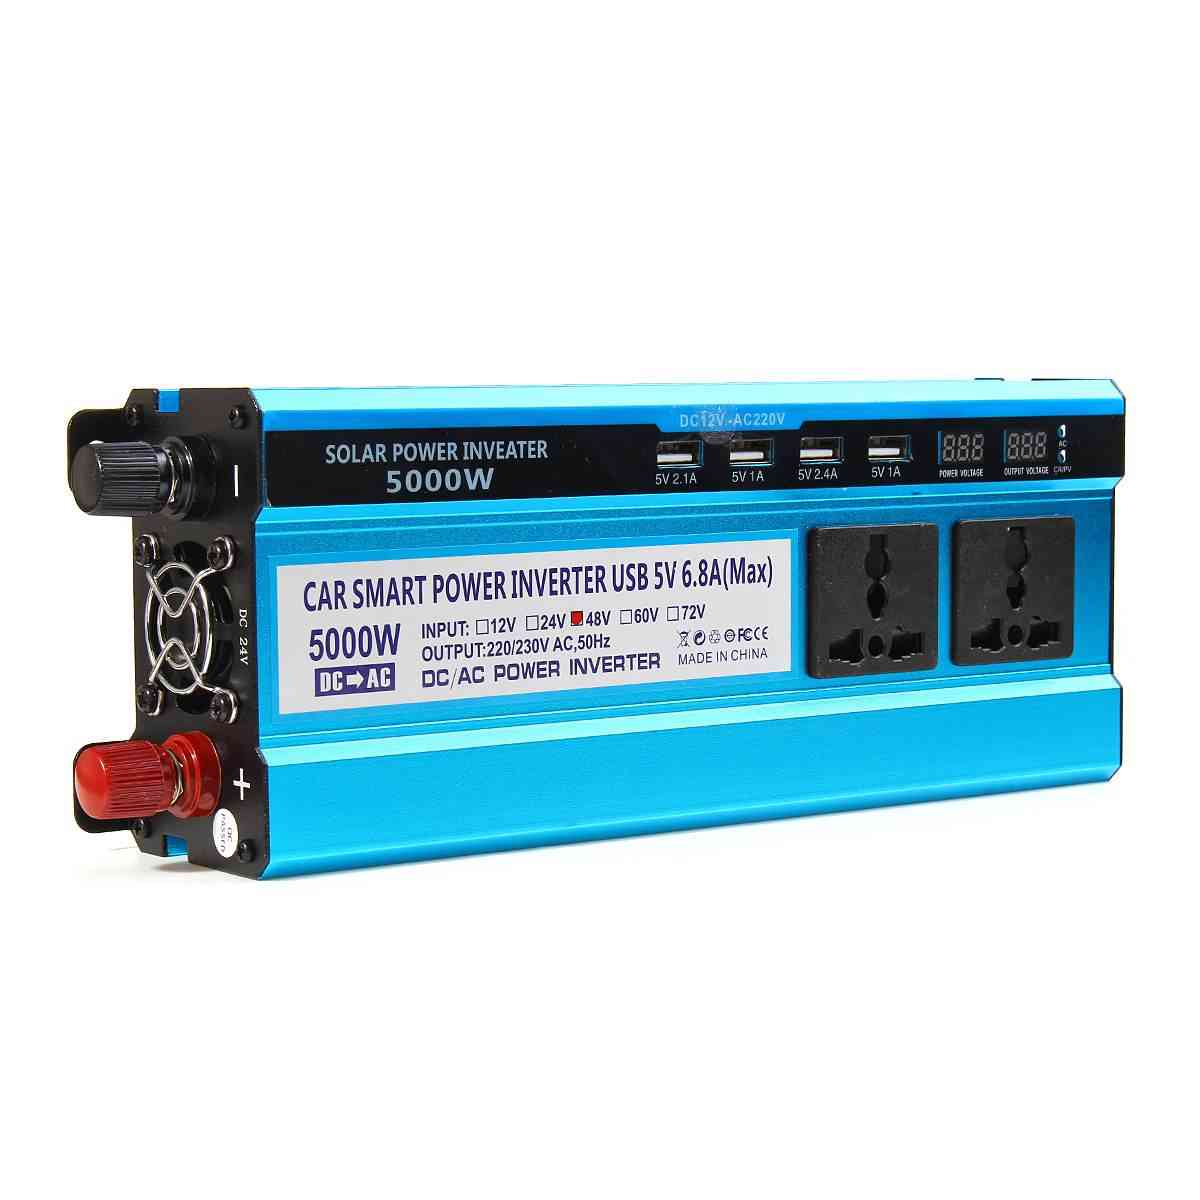 5000w Solar Power Inverter With Double Display, 3 Sockets And 4 Usb Ports